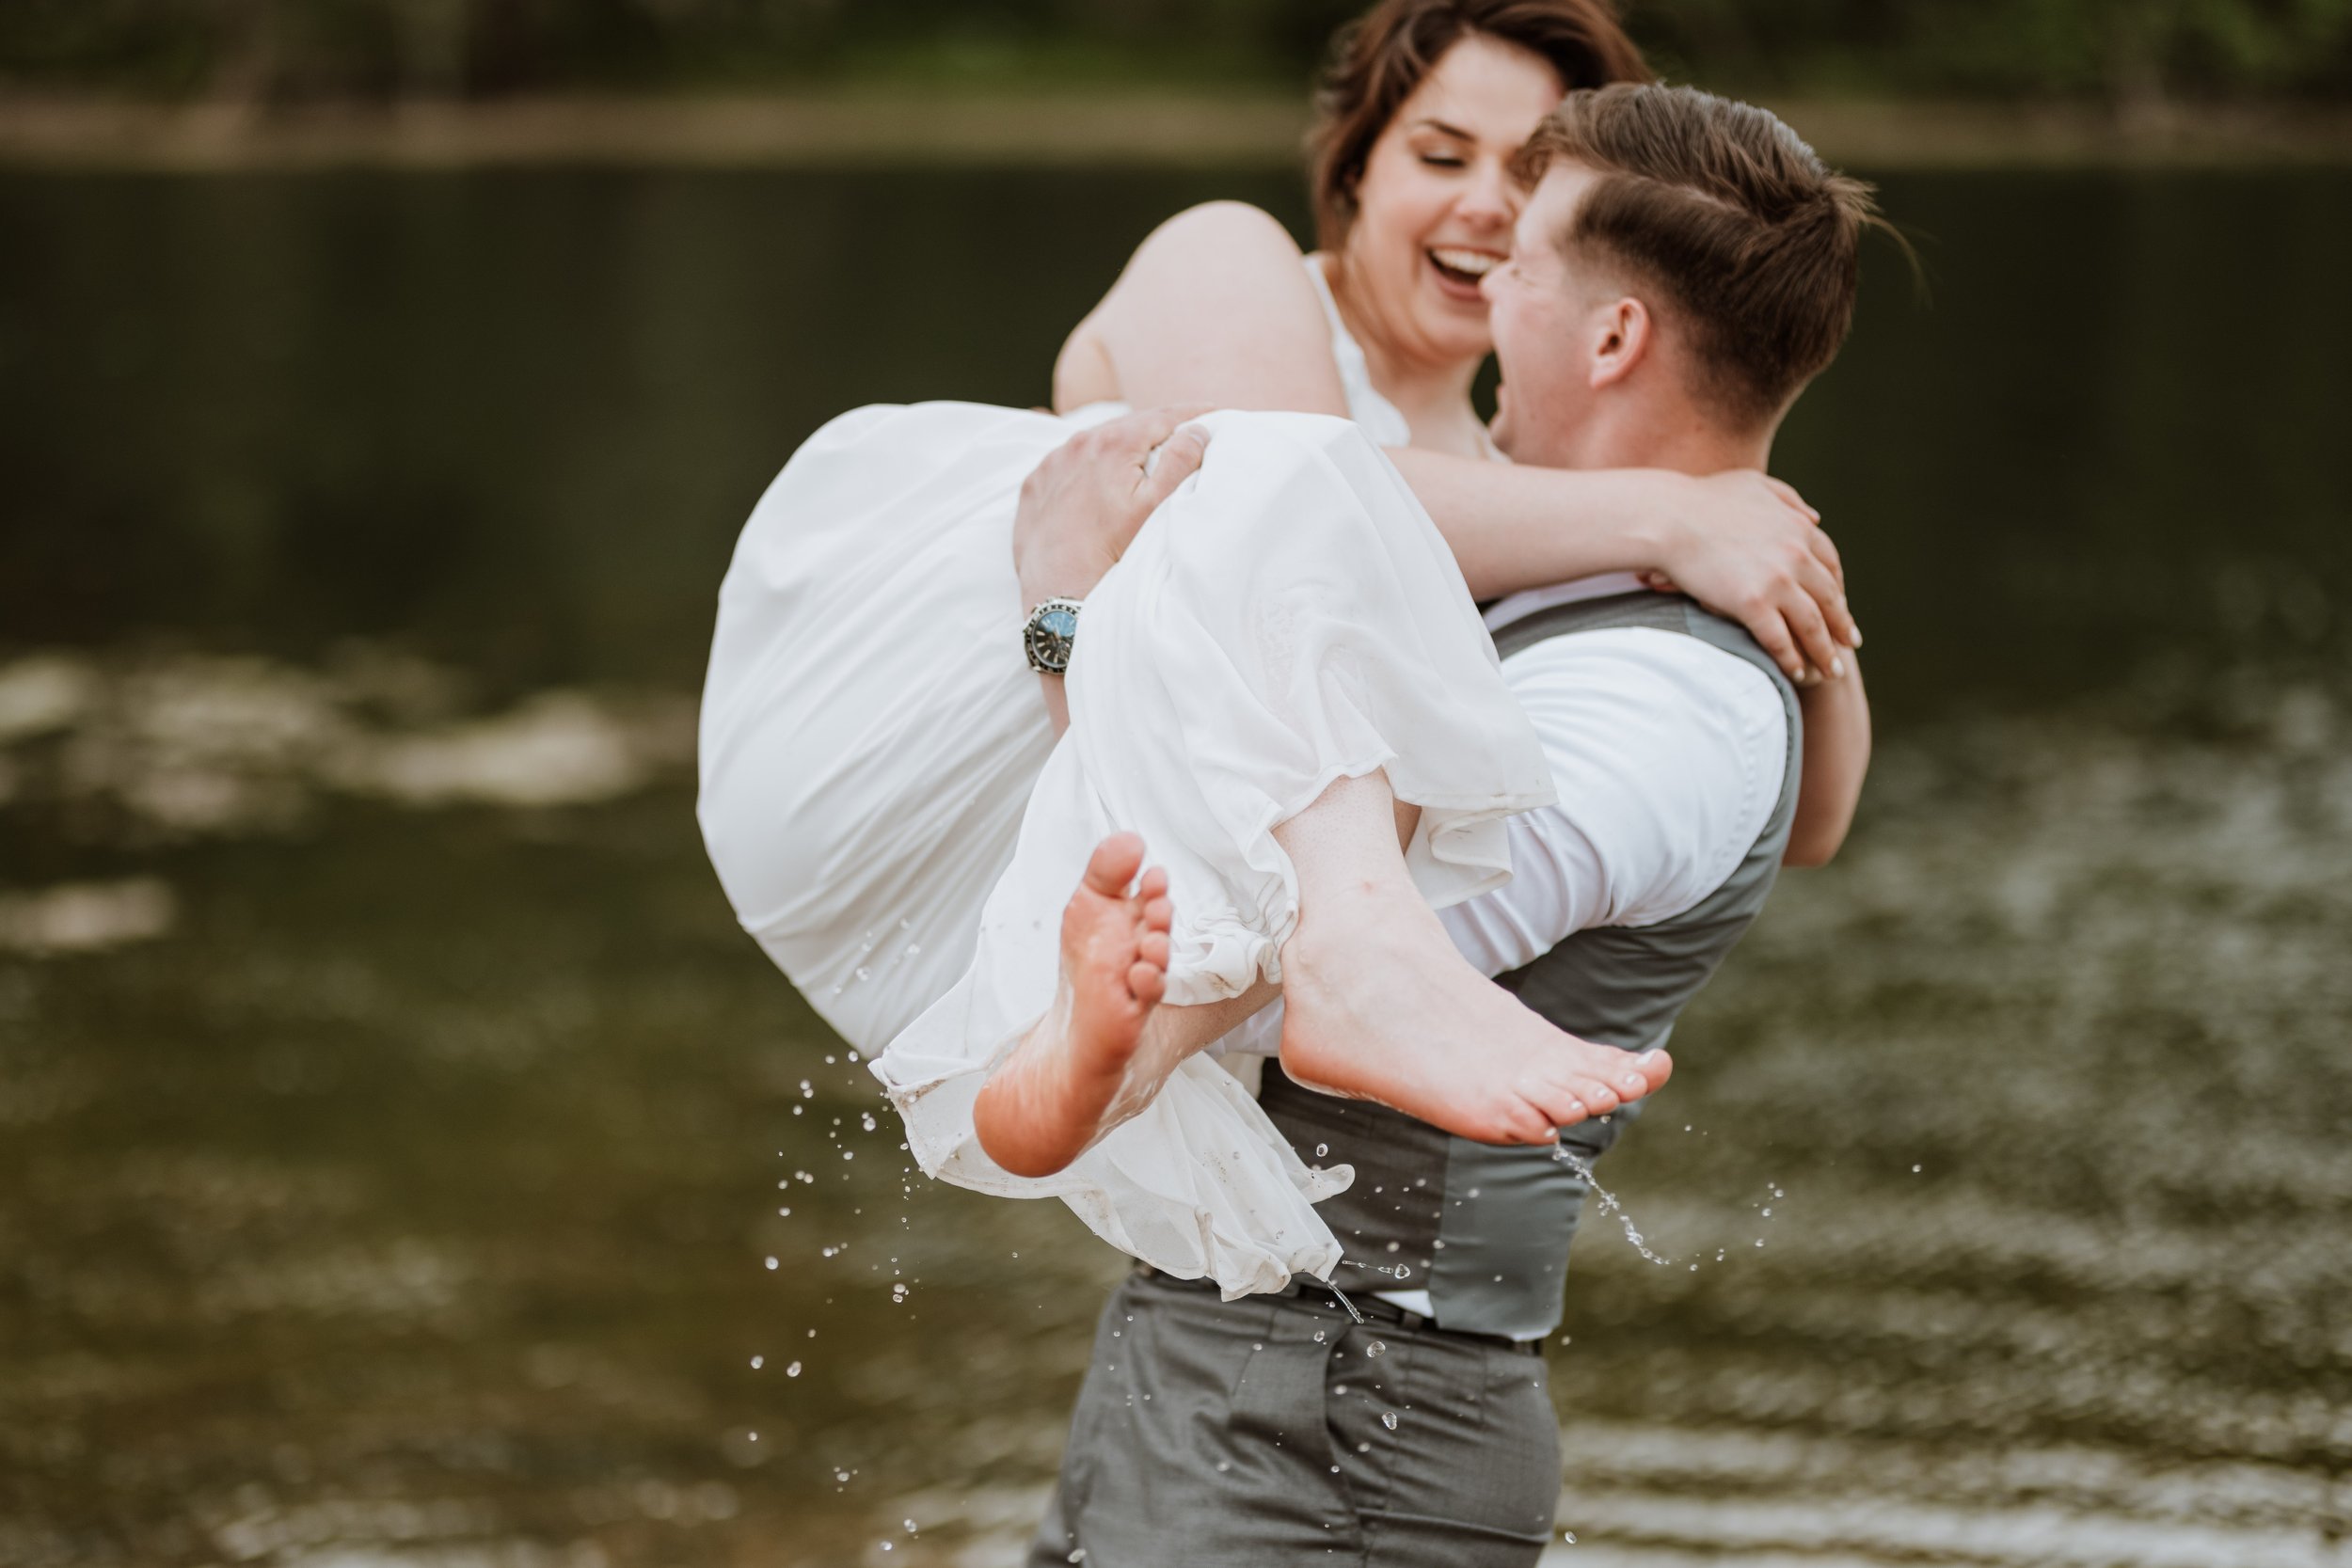 Newlywed groom carrying his wife in a playful manner through water